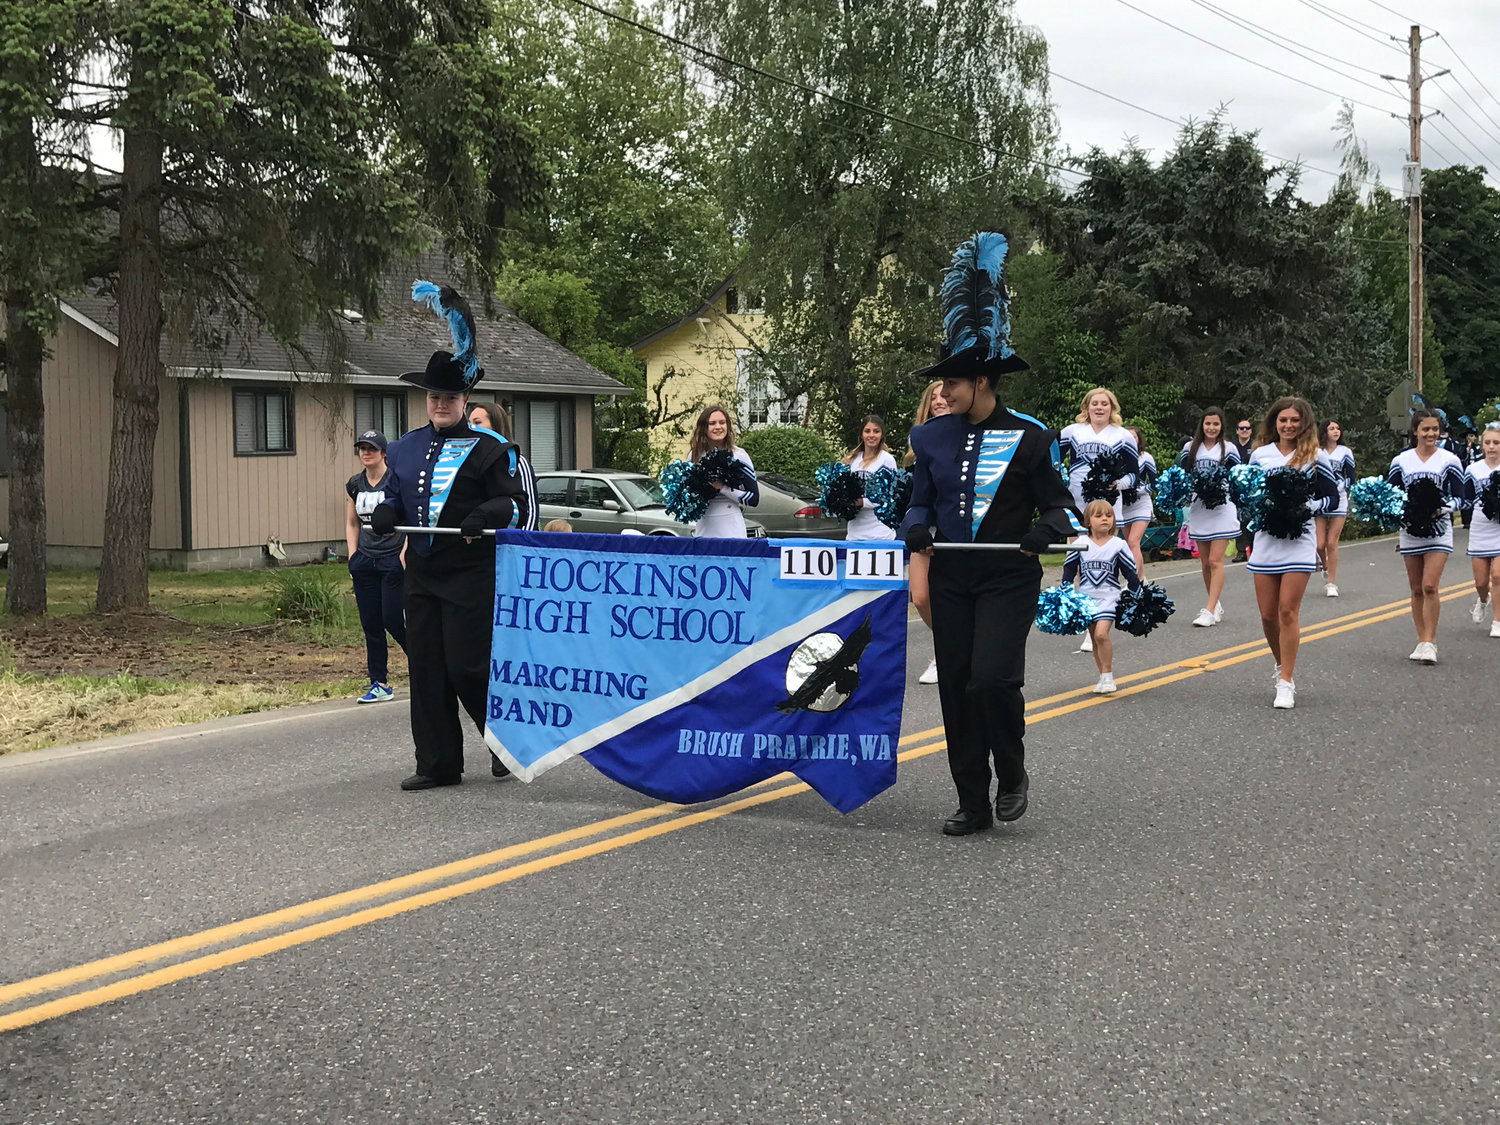 The Hockinson High School marching band and cheer team takes part in the Fun Days parade in 2019.